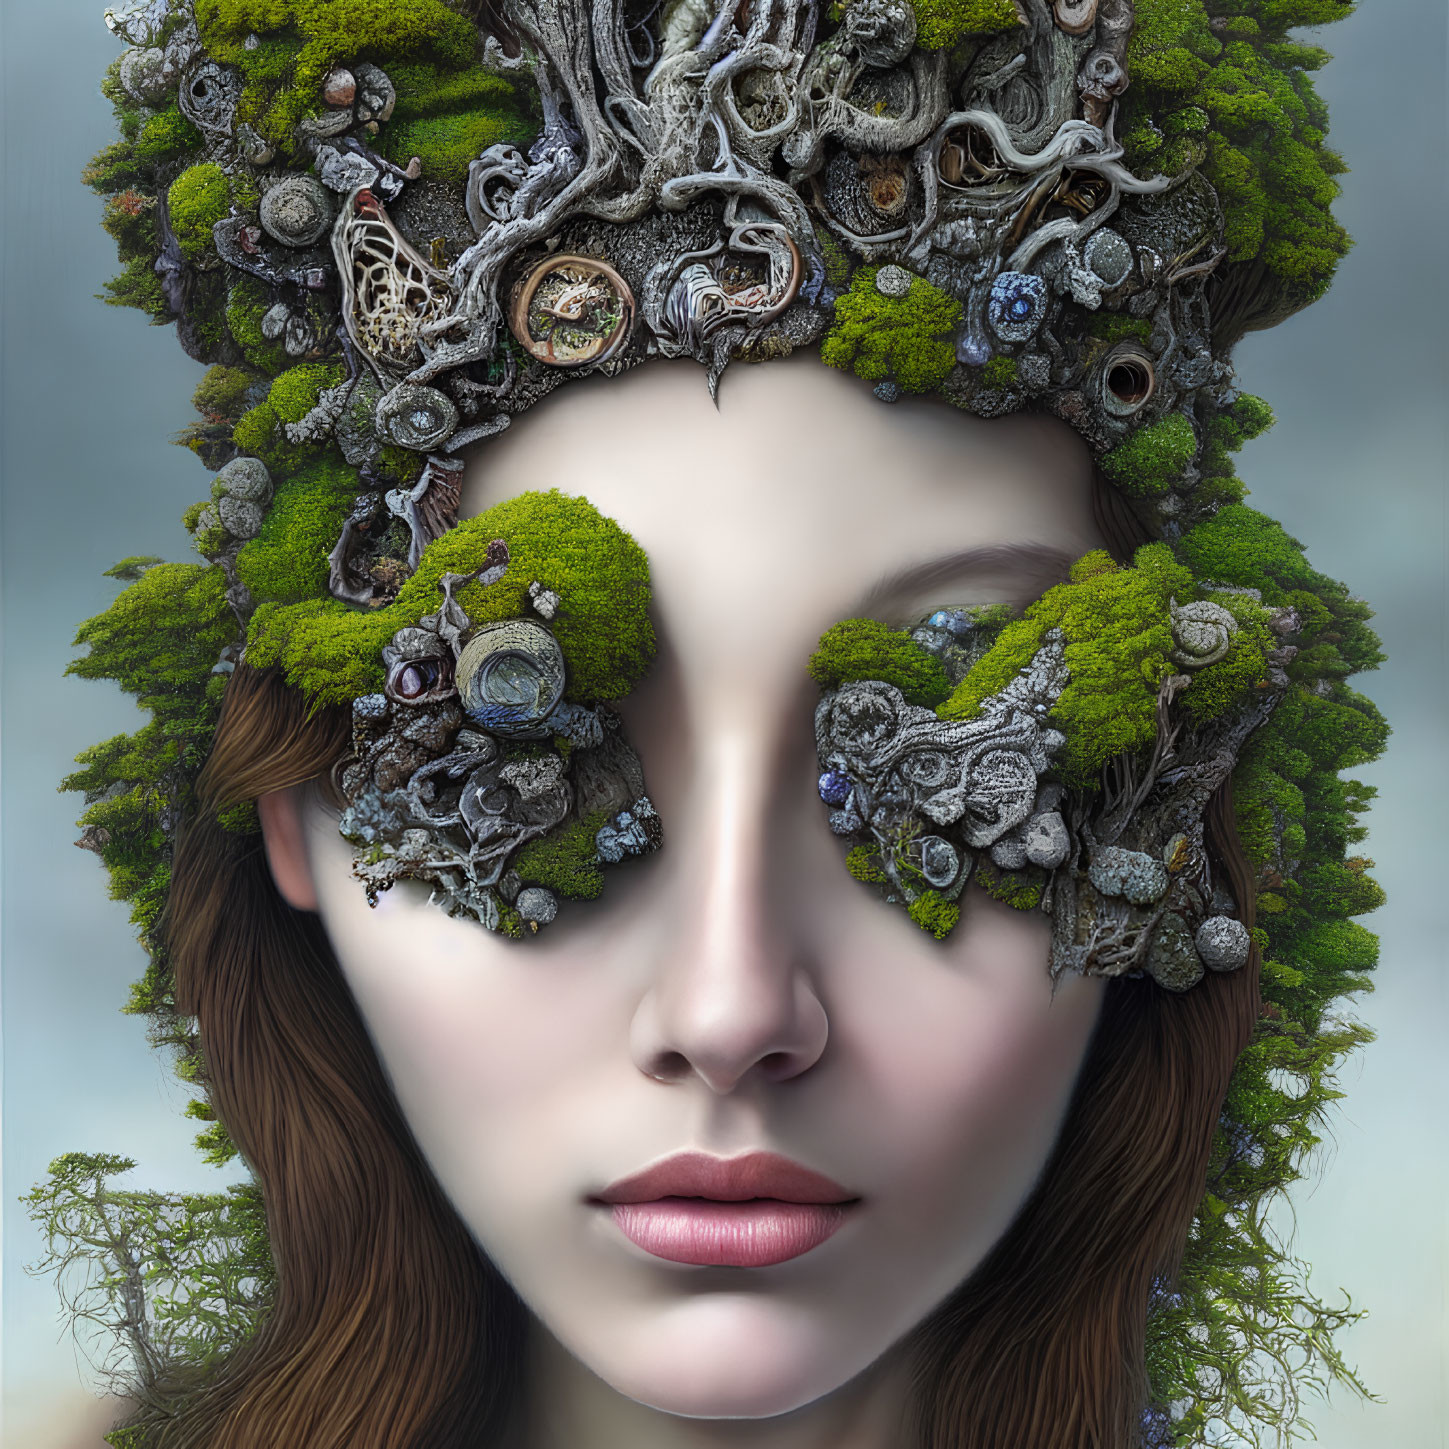 Surreal portrait of woman with moss crown and mechanical elements